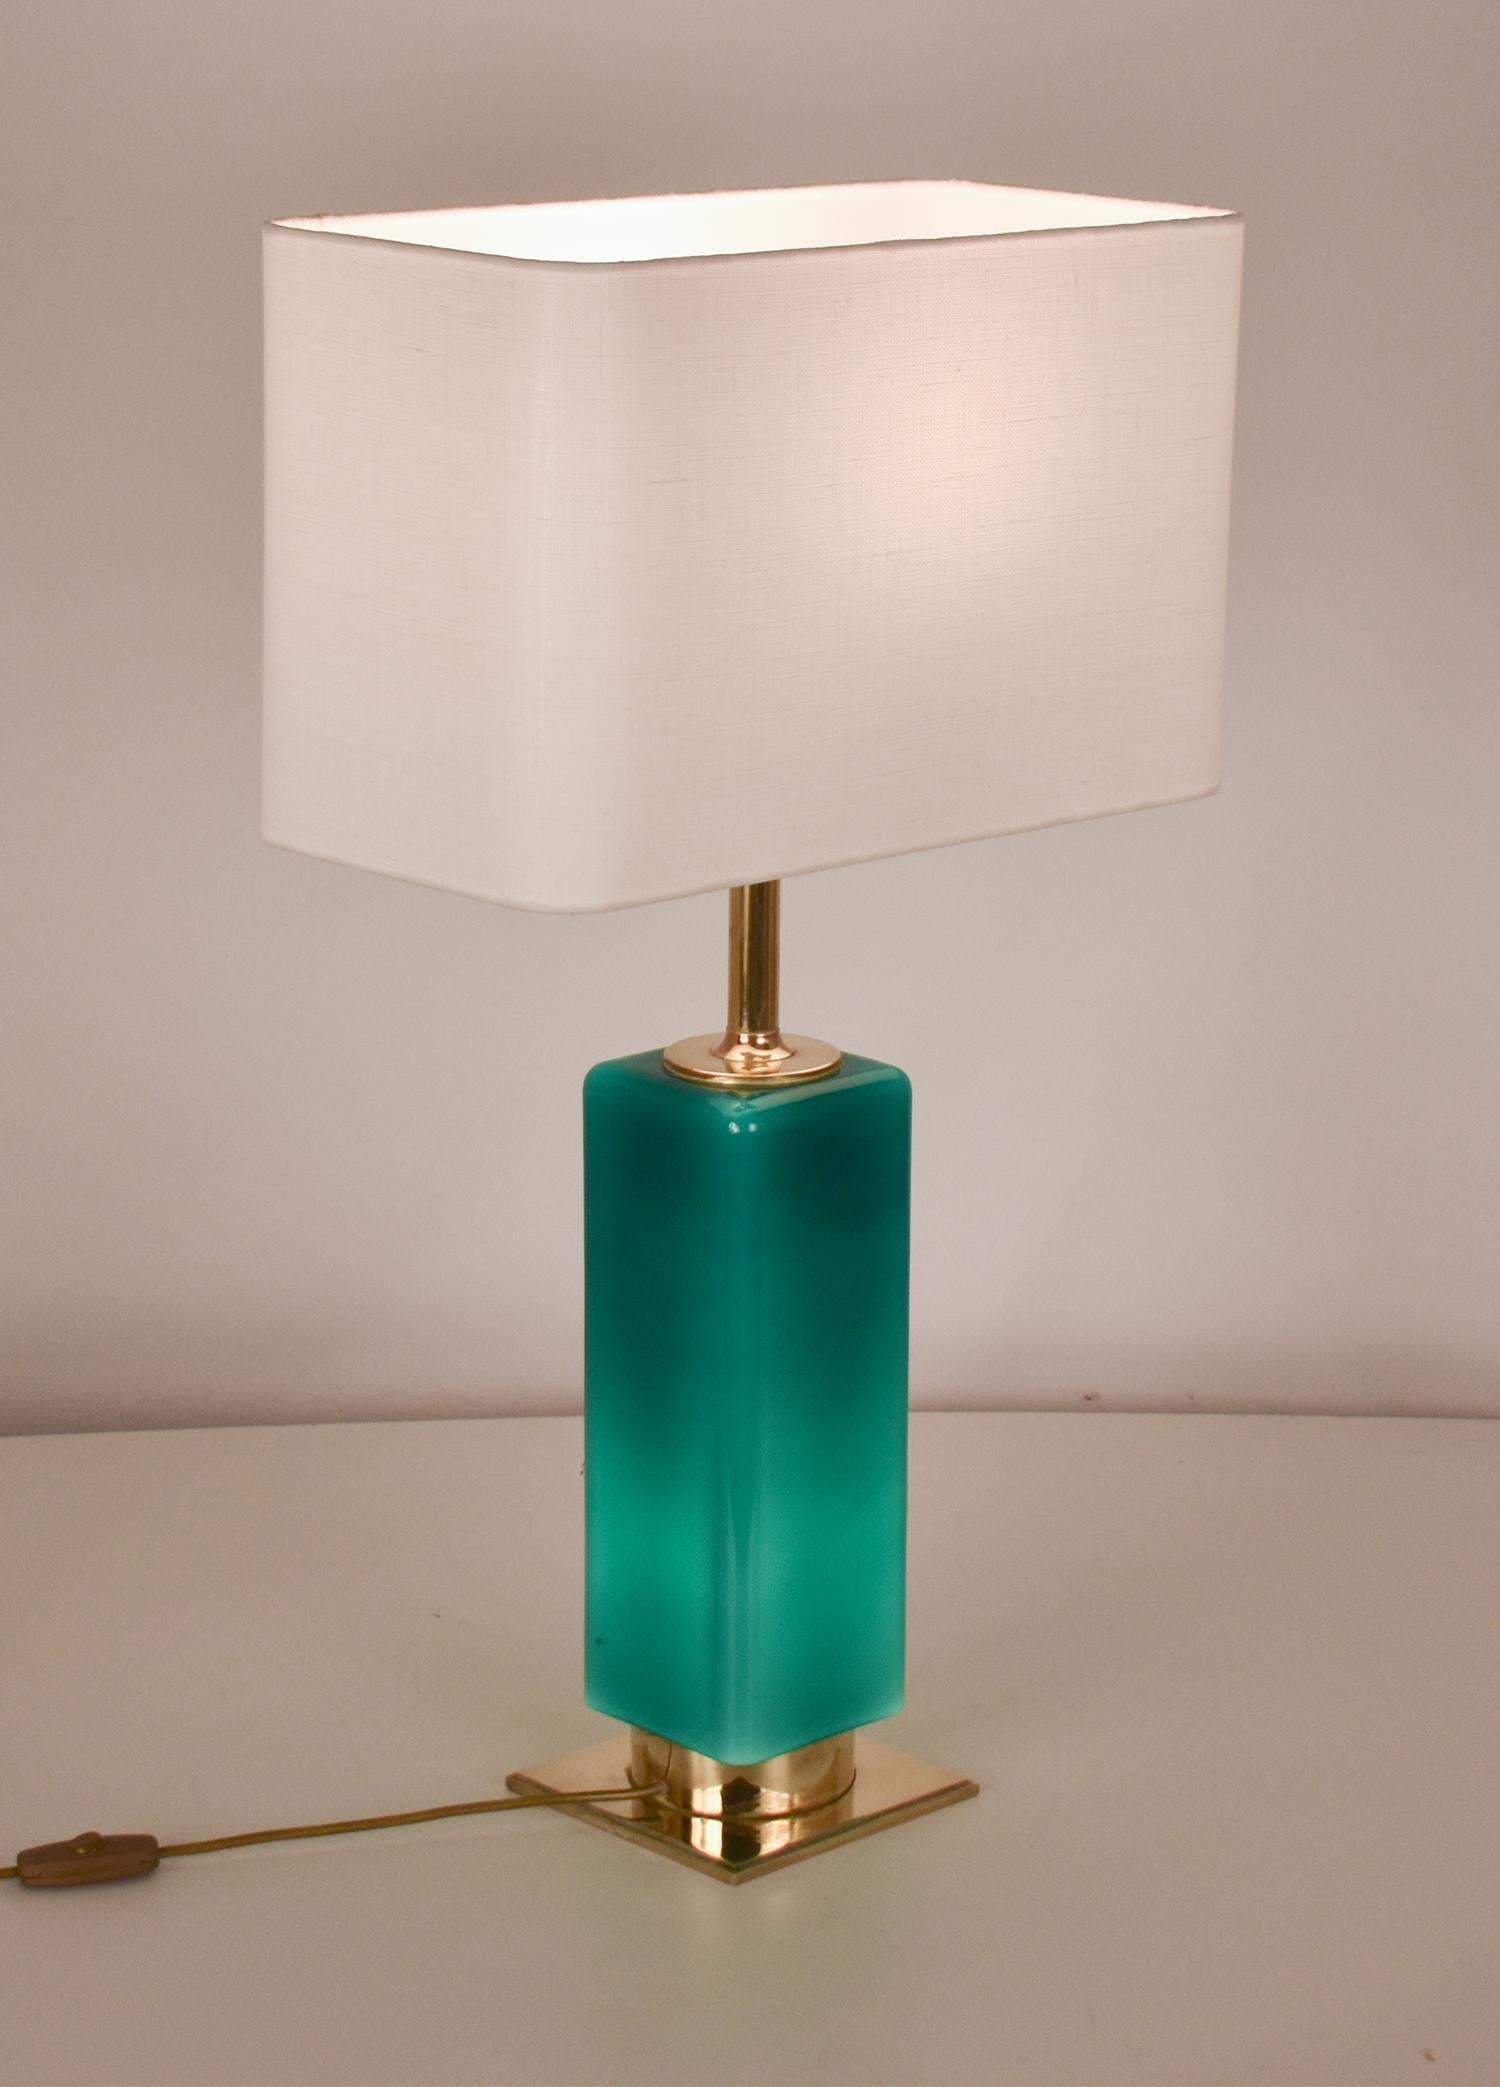 Late 20th Century Mid- Century Large Green Glass and Brass Table Lamp Metalarte, Spain, 1970's For Sale